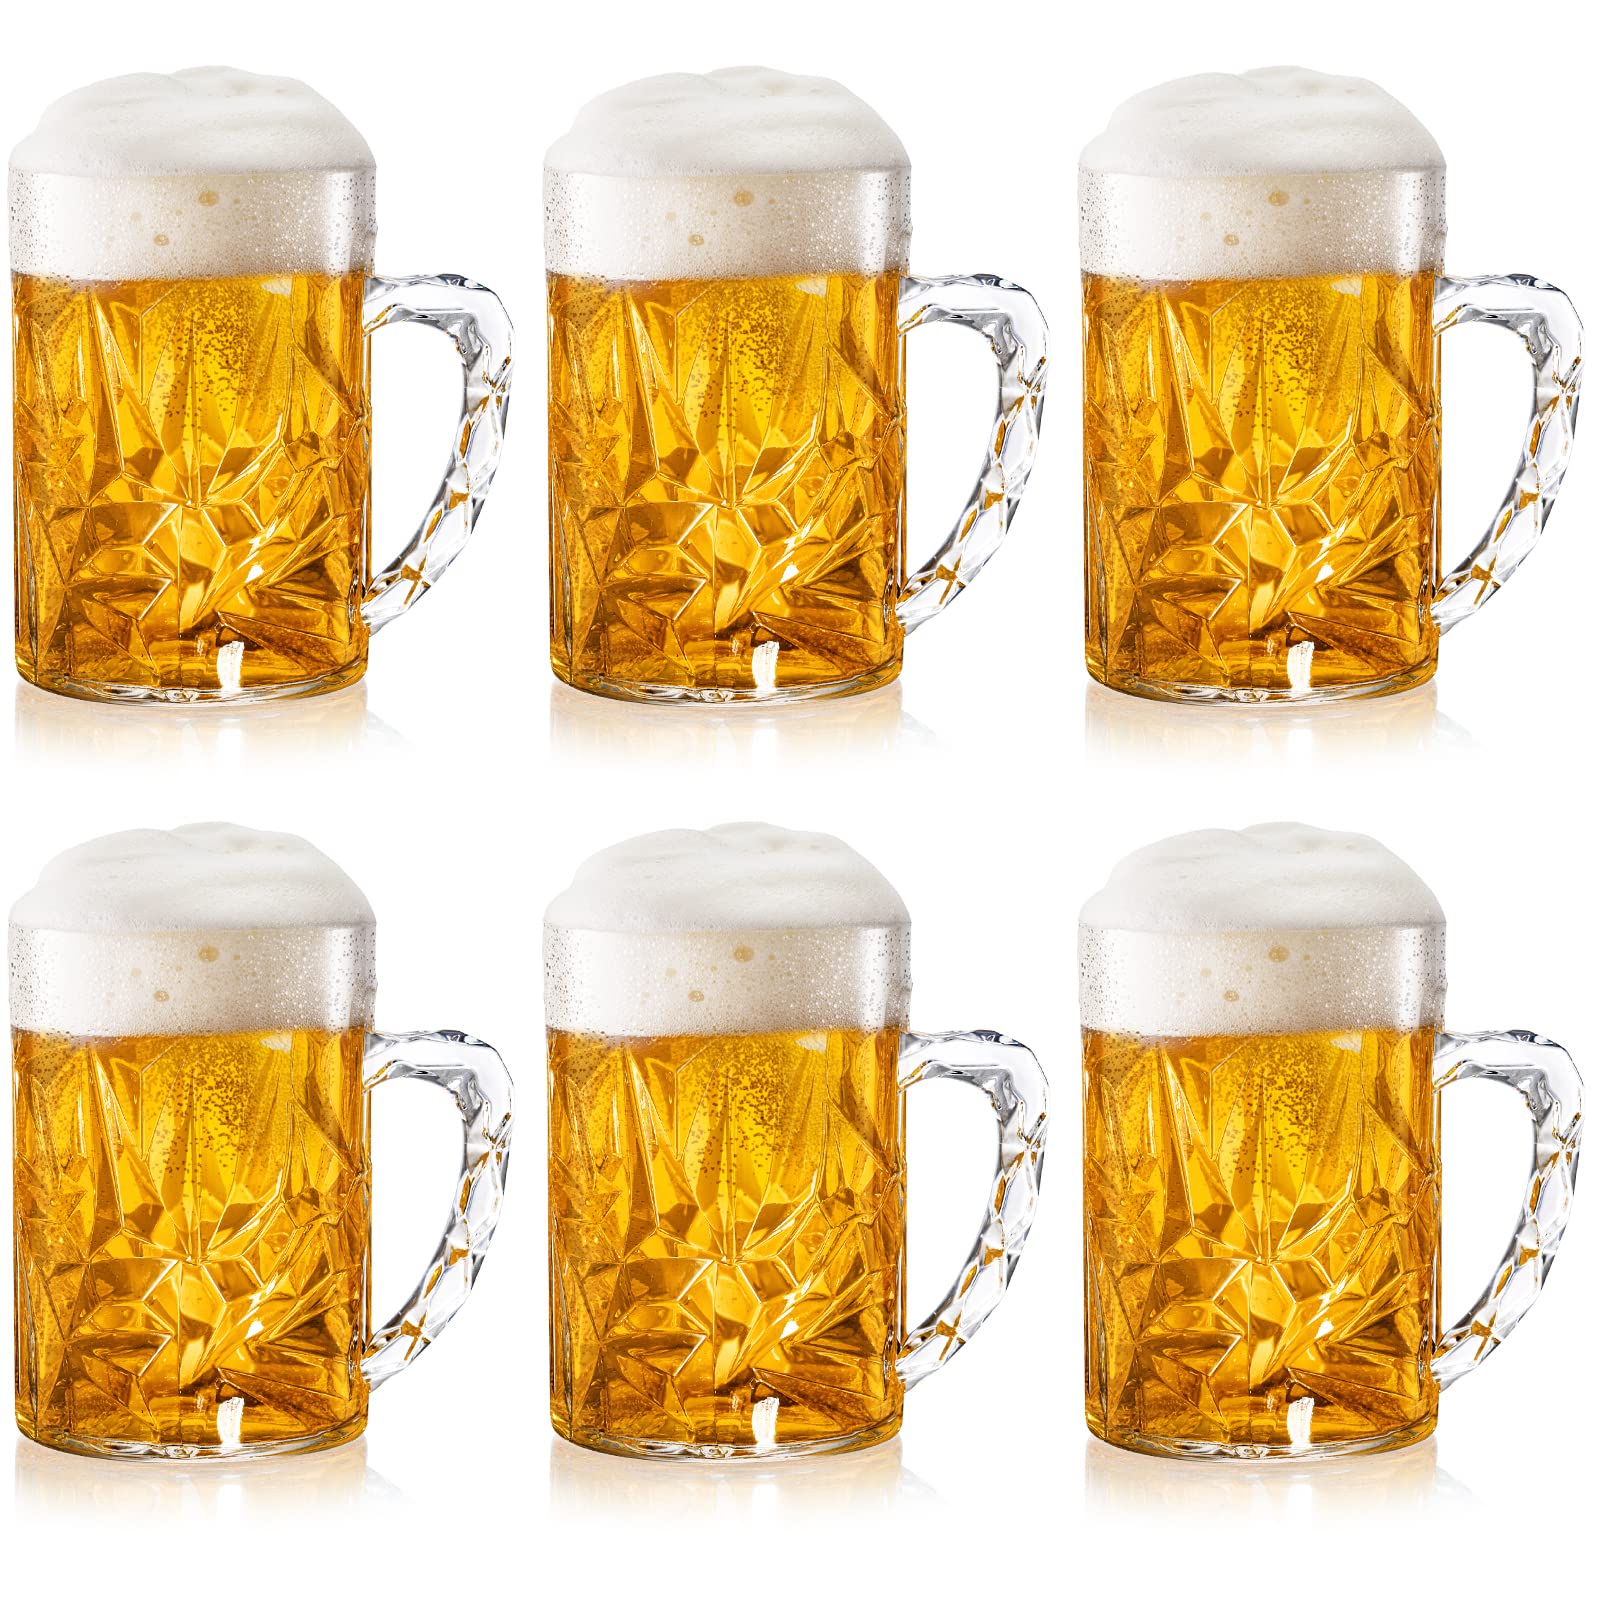 Peohud 6 Pack Plastic Beer Mugs, 20 Oz Beer Stein Glasses with Handle, Clear Large Beer Drinking Cups for Bar, Cocktail, Alcohol, Beverages, Milk, Juice, Soda